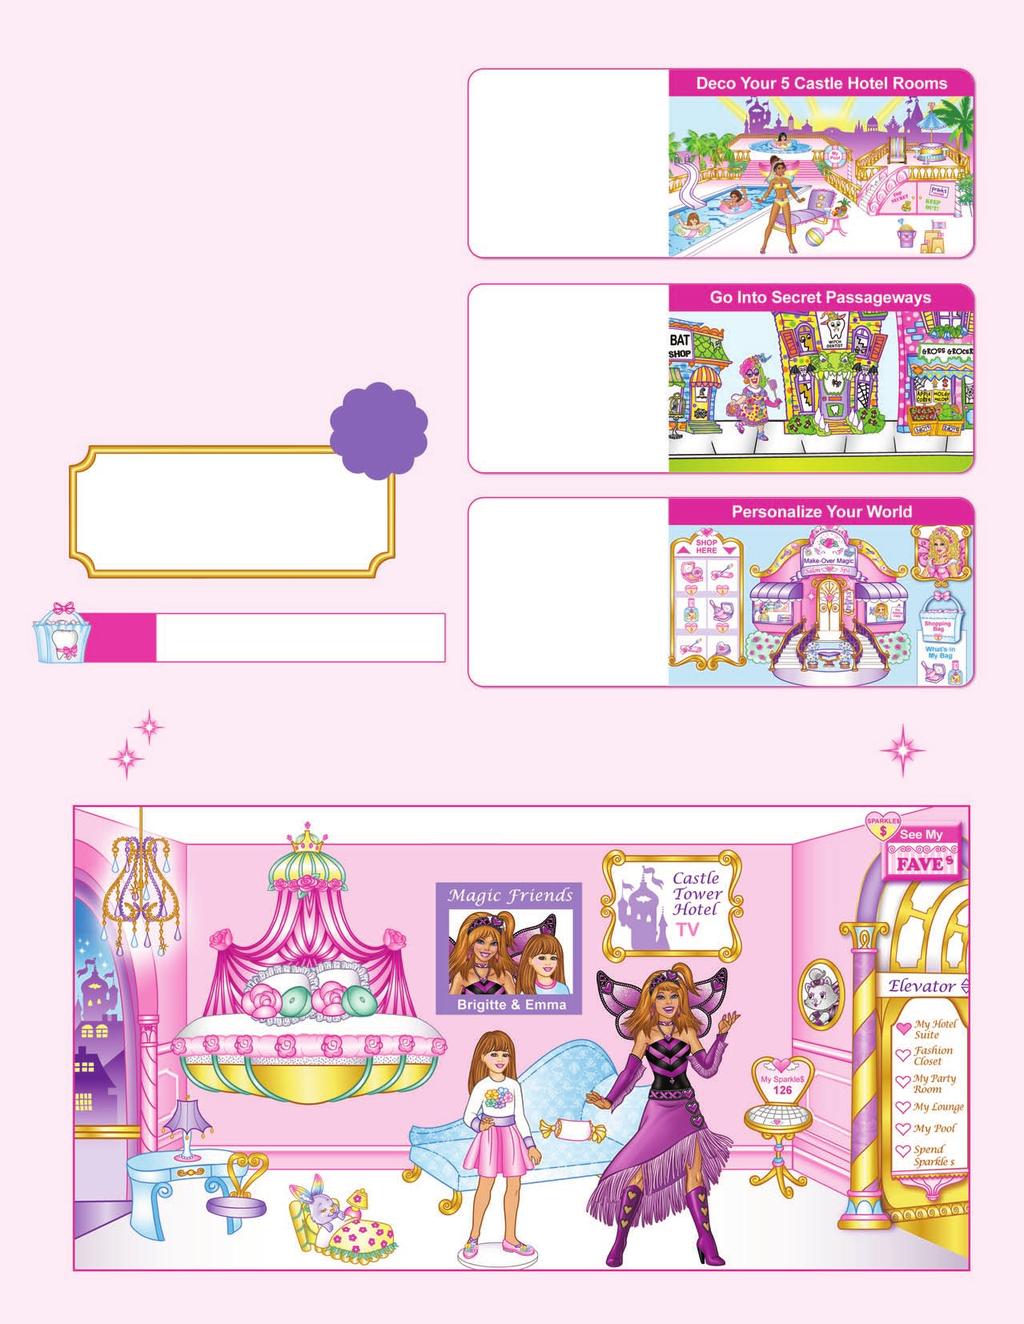 Upgraded VIP Membership With an Upgraded VIP Membership, your girl enters a whole new online world in Real Fairyland. She ll earn and spend Sparkle $ in fairy shops & secret passageways.